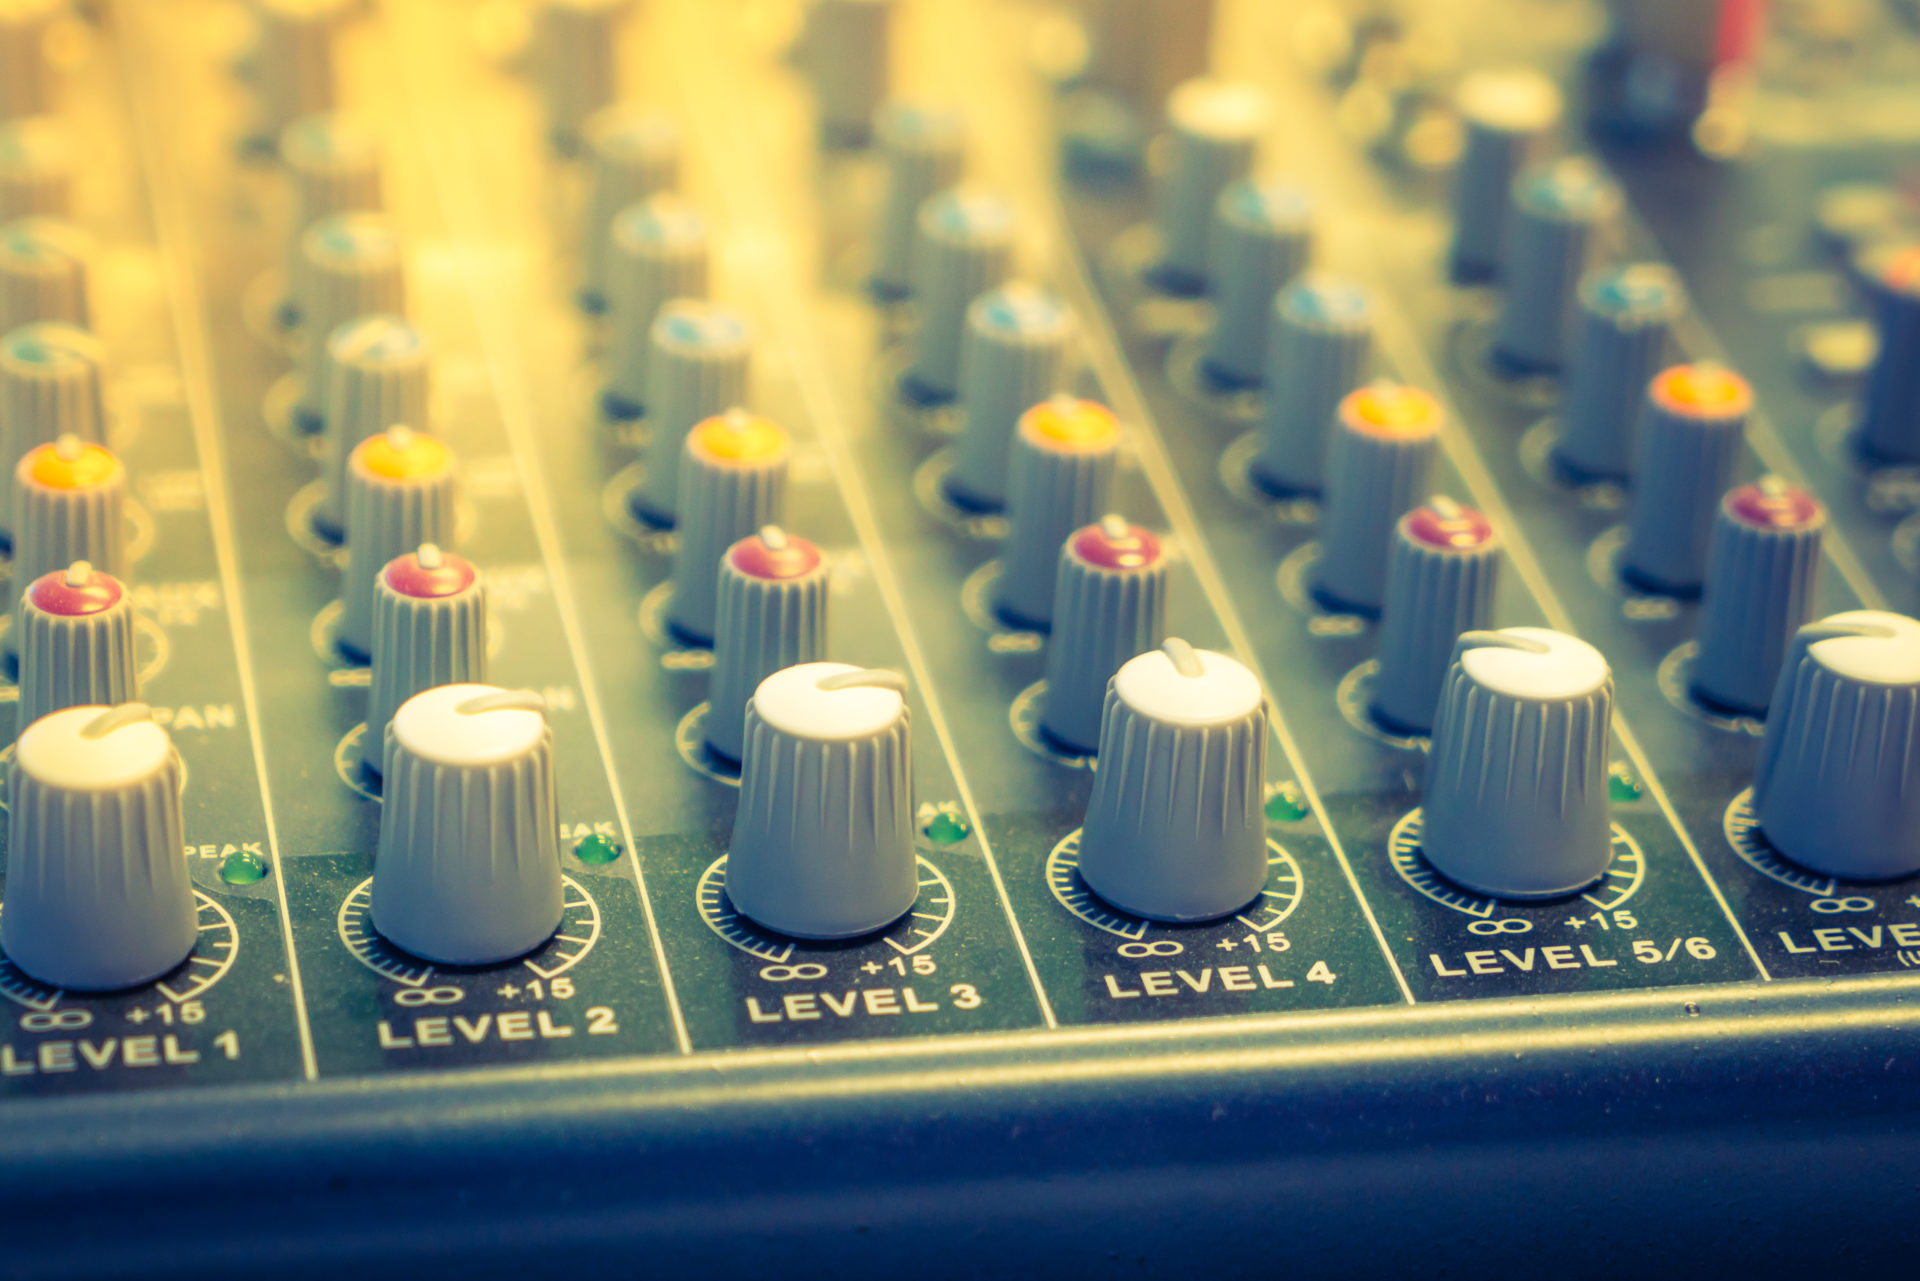 Music mixer desk with various knobs ( Filtered image processed v